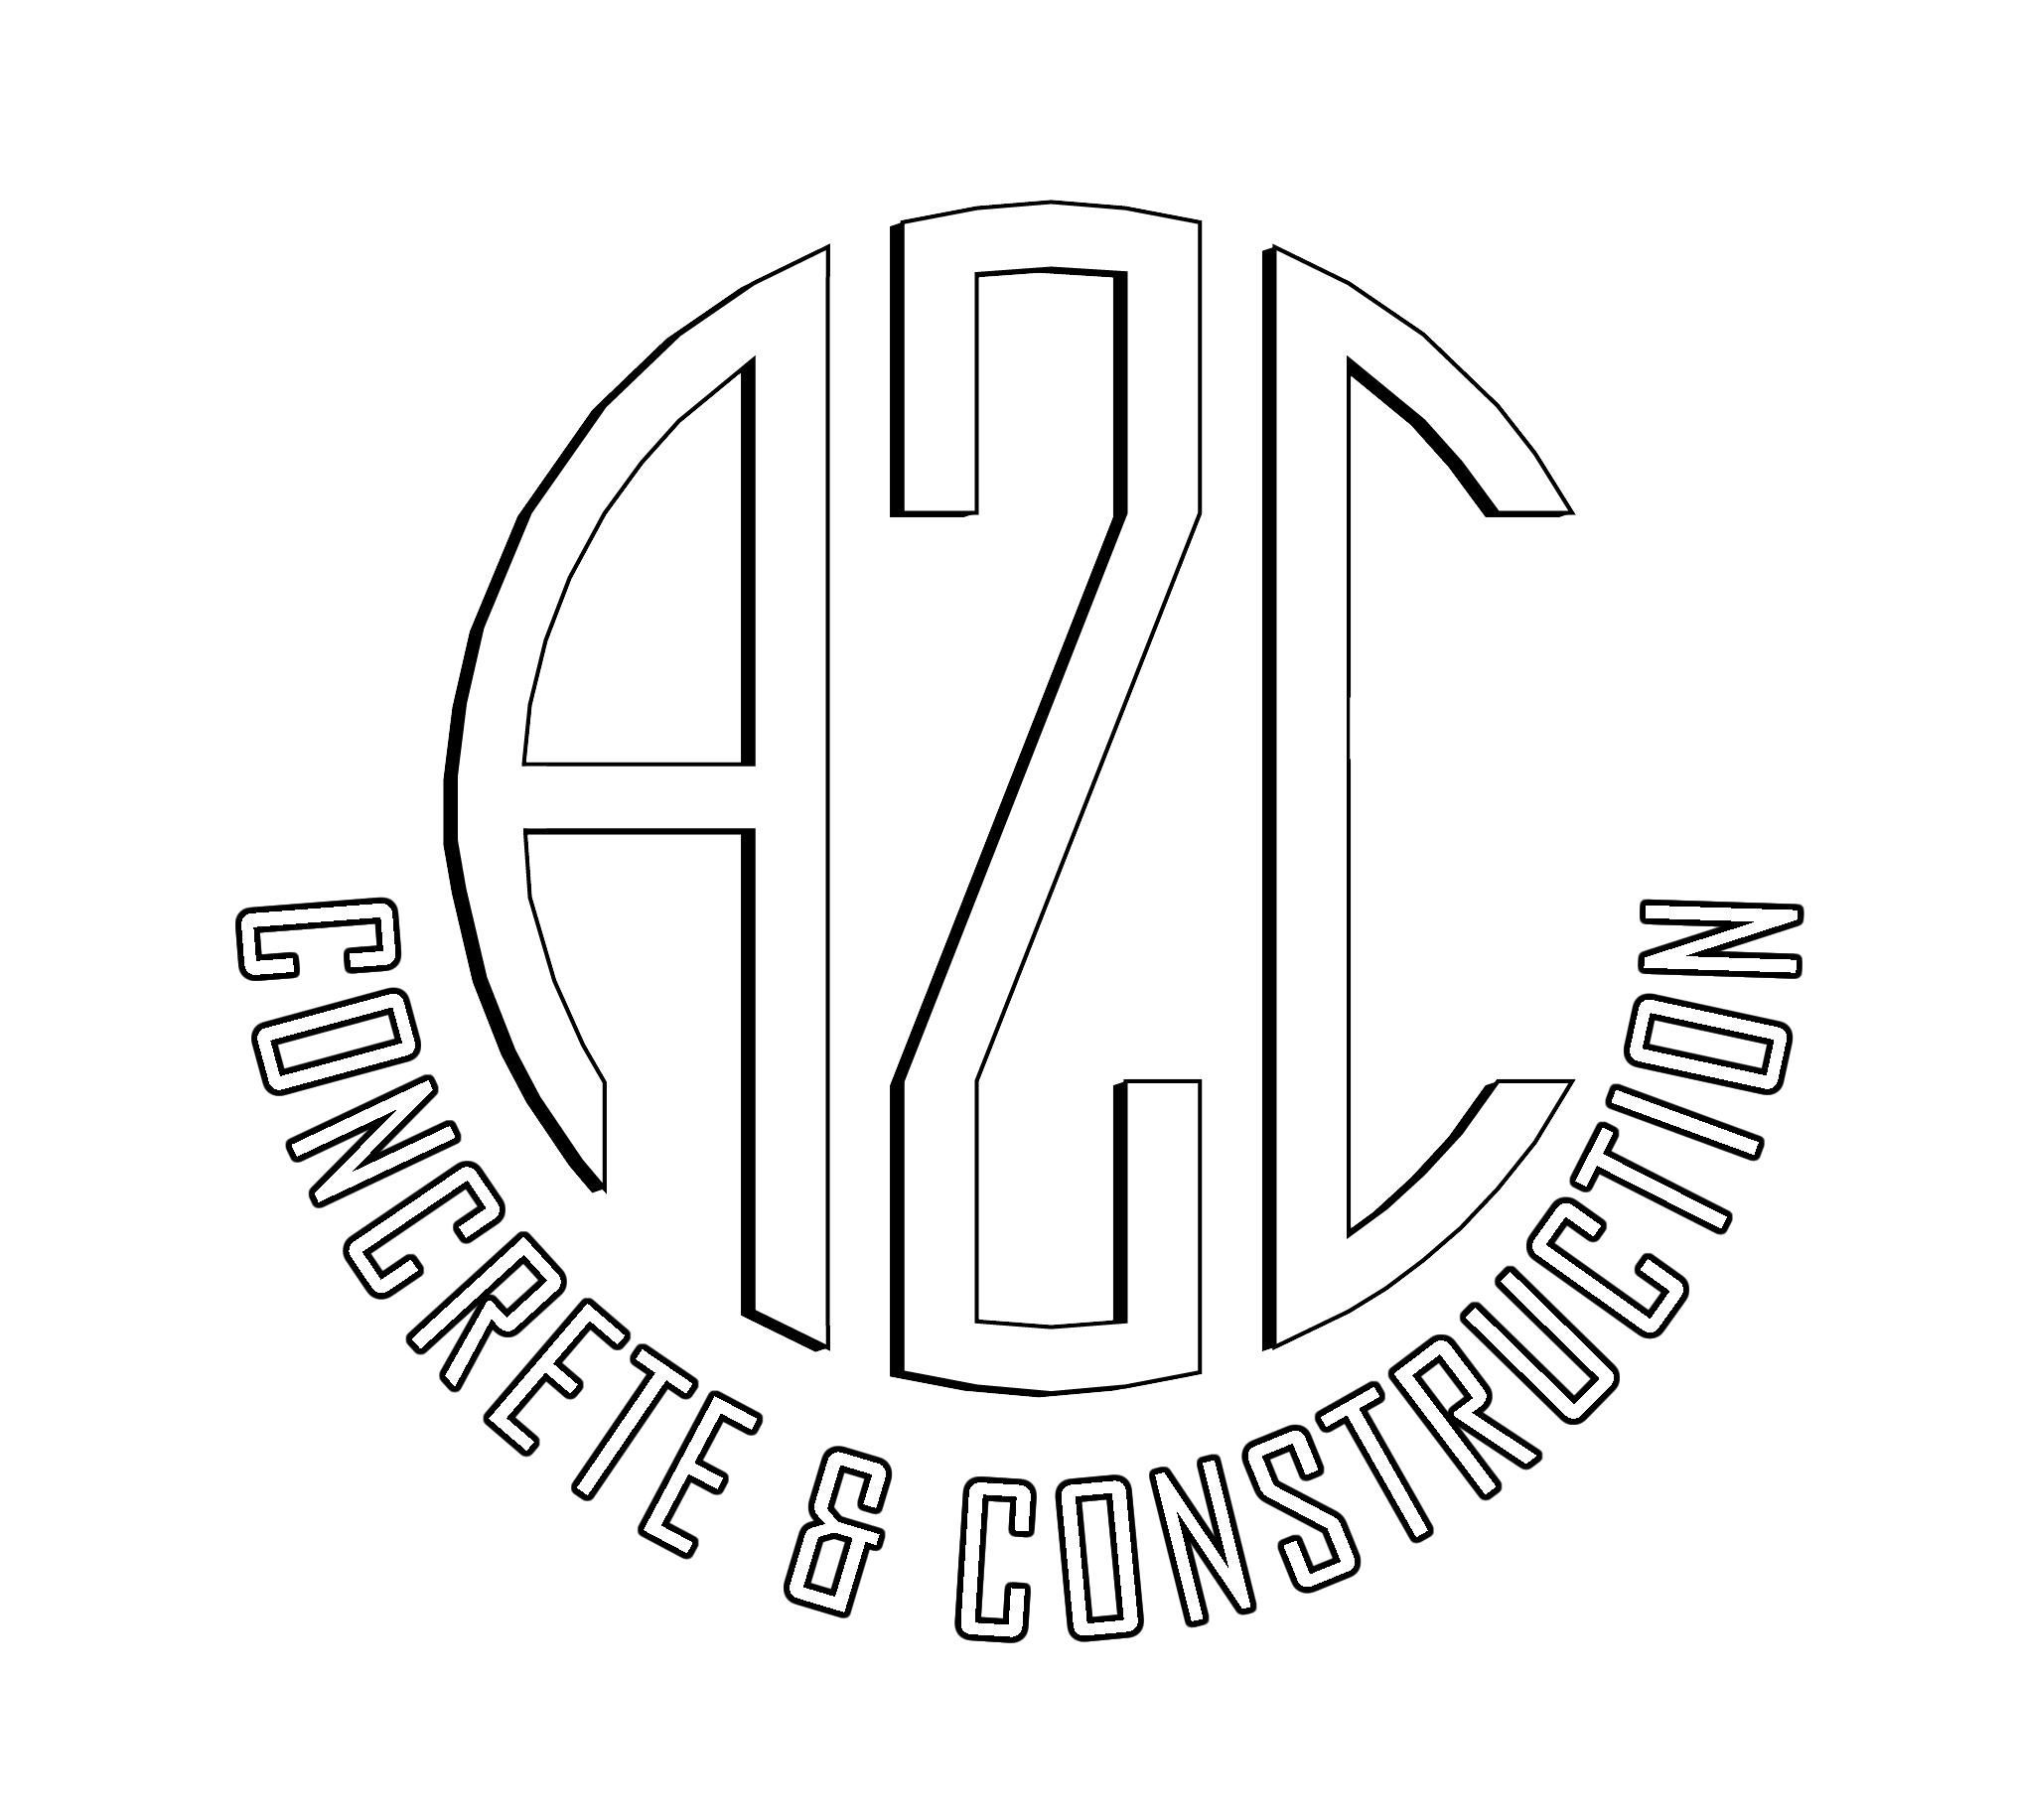 A2C Construction and Concrete in Calgary